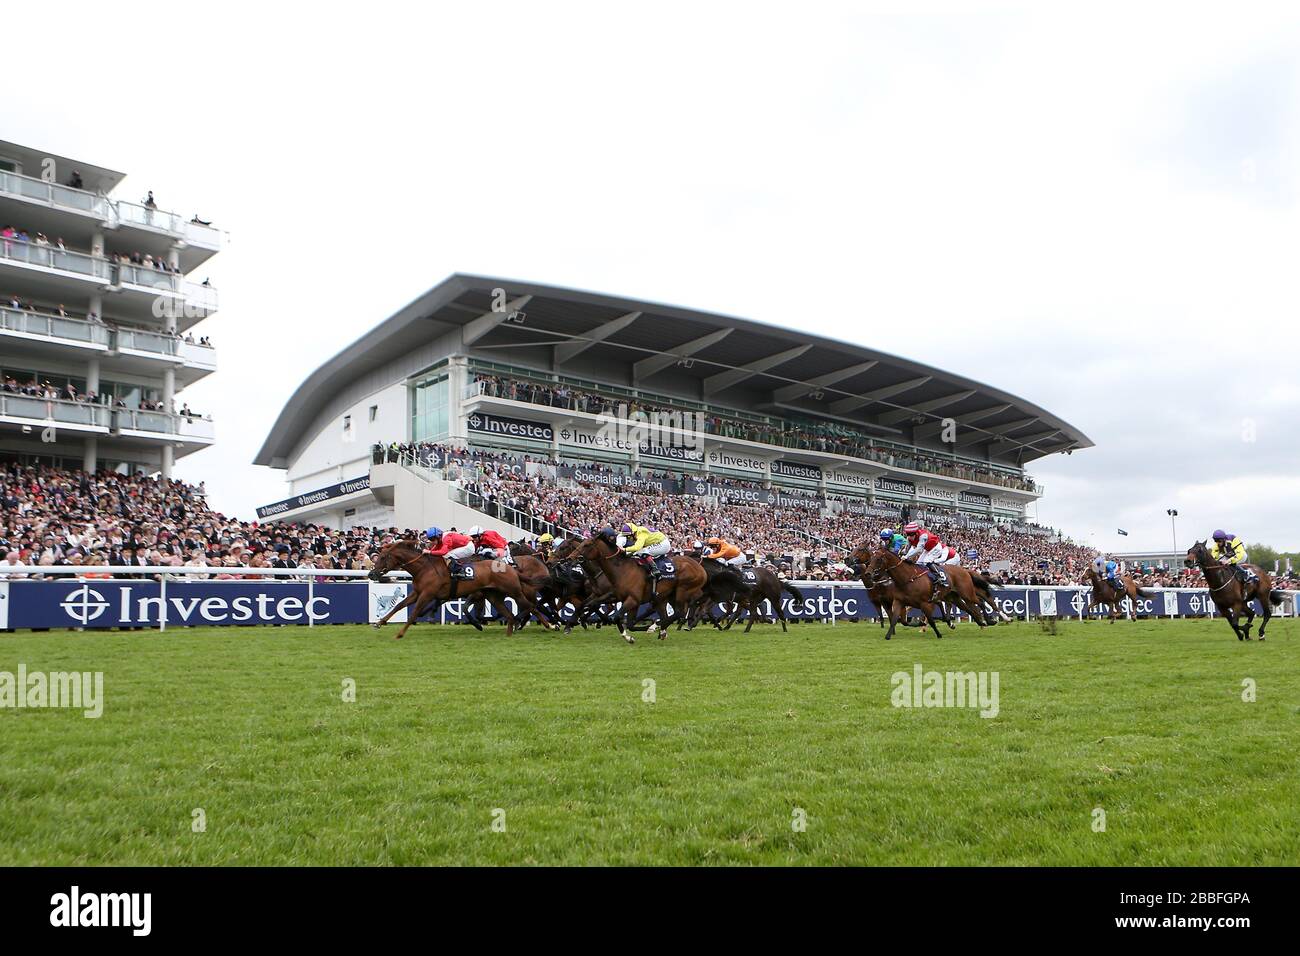 Duke of Firenze (left) ridden by Ryan Moore comes home to win The Investec Specialist Bank 'Dash' Stock Photo